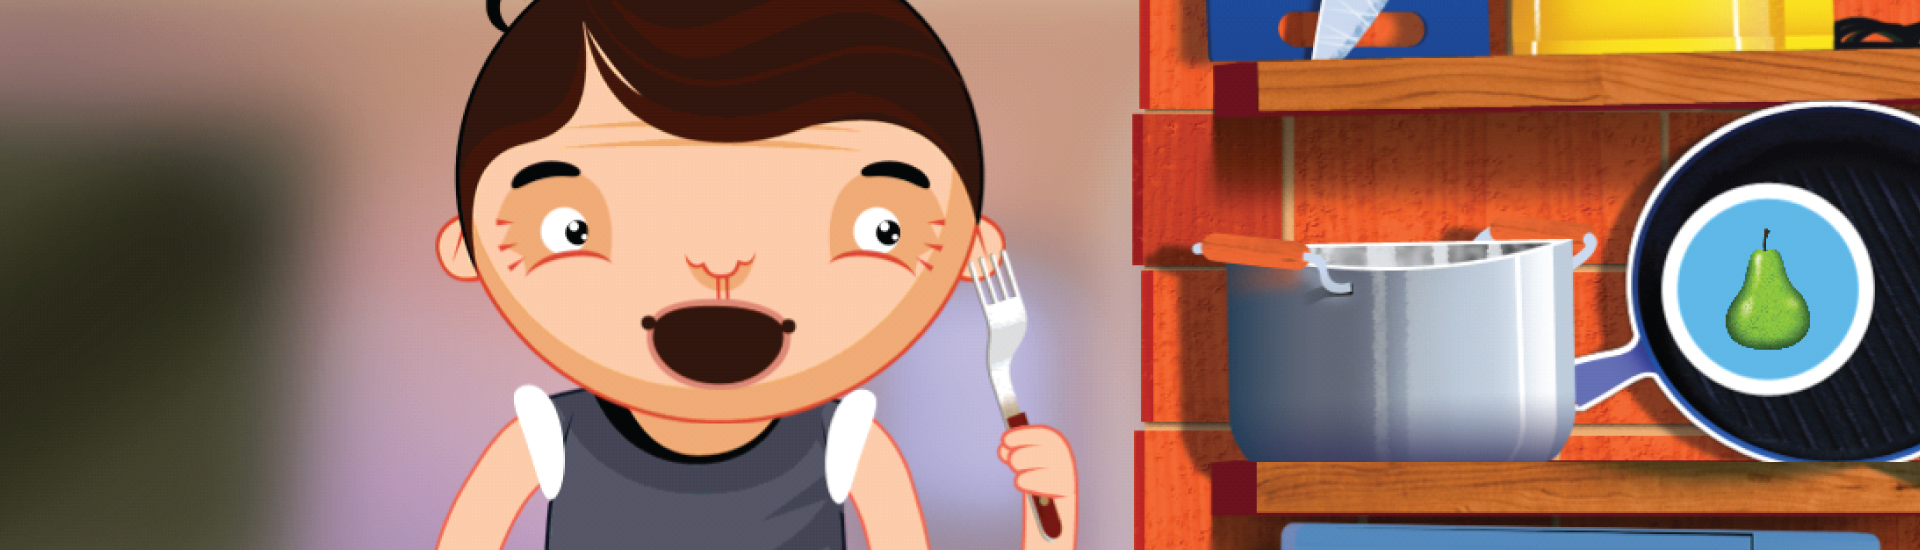 How To Use Toca Kitchen For Children With Autism